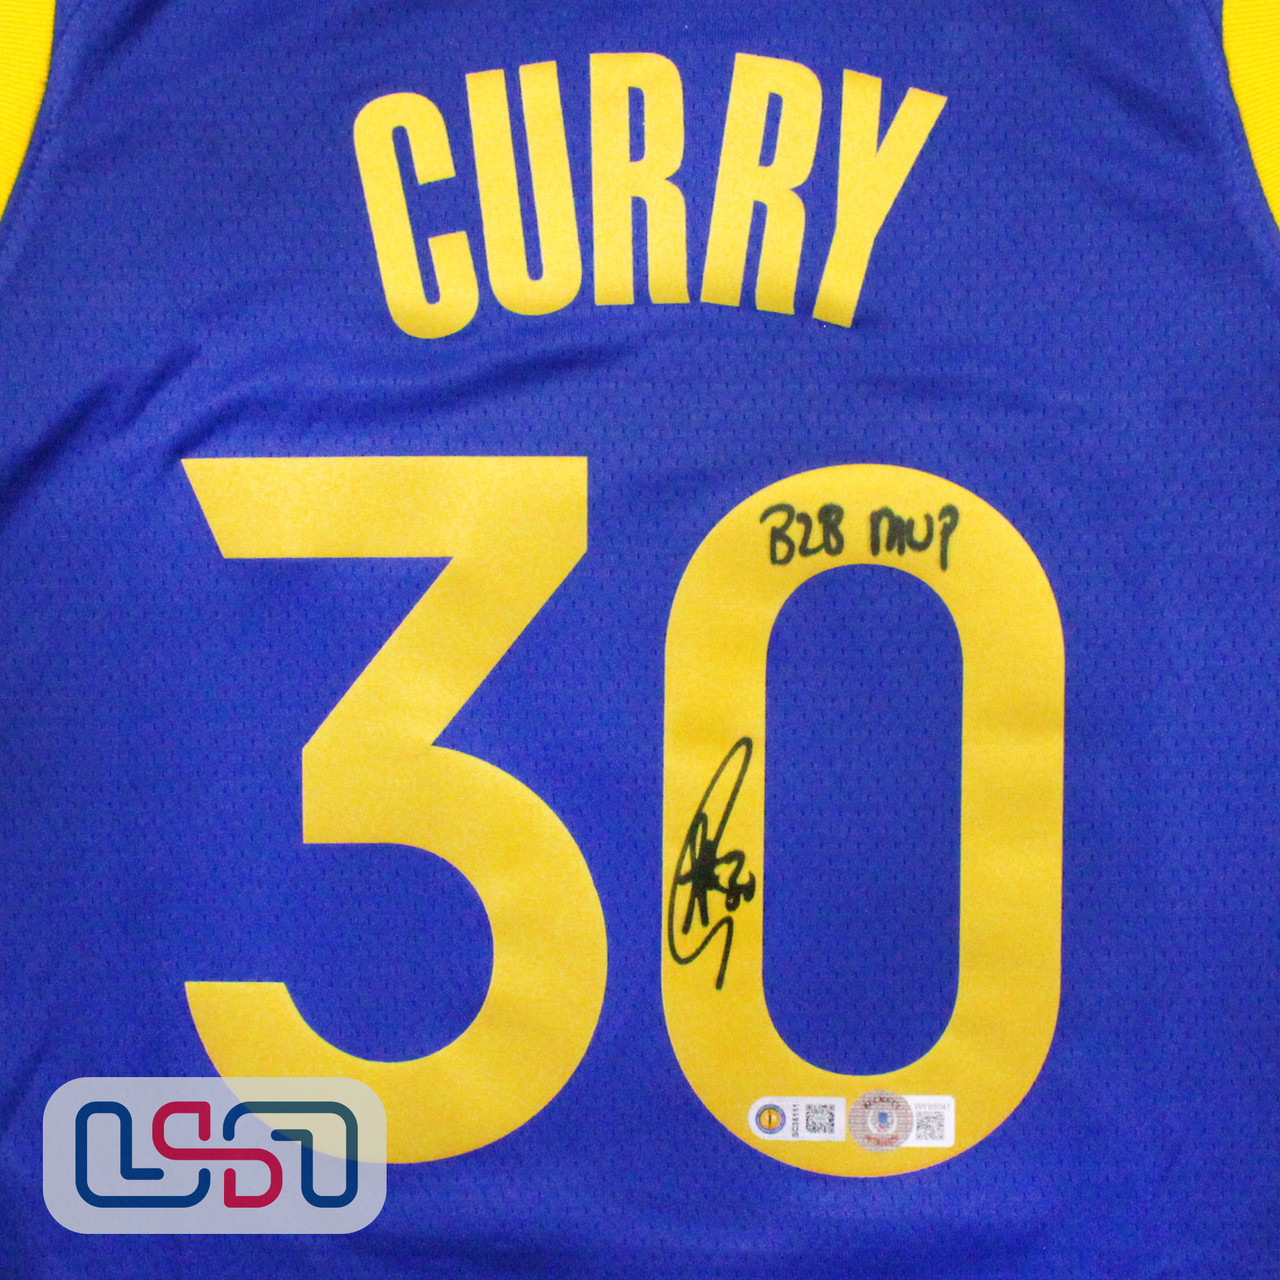 Stephen Curry Golden State Warriors Autographed Blue Nike Swingman Jersey  with B2B MVP 1516 Inscription